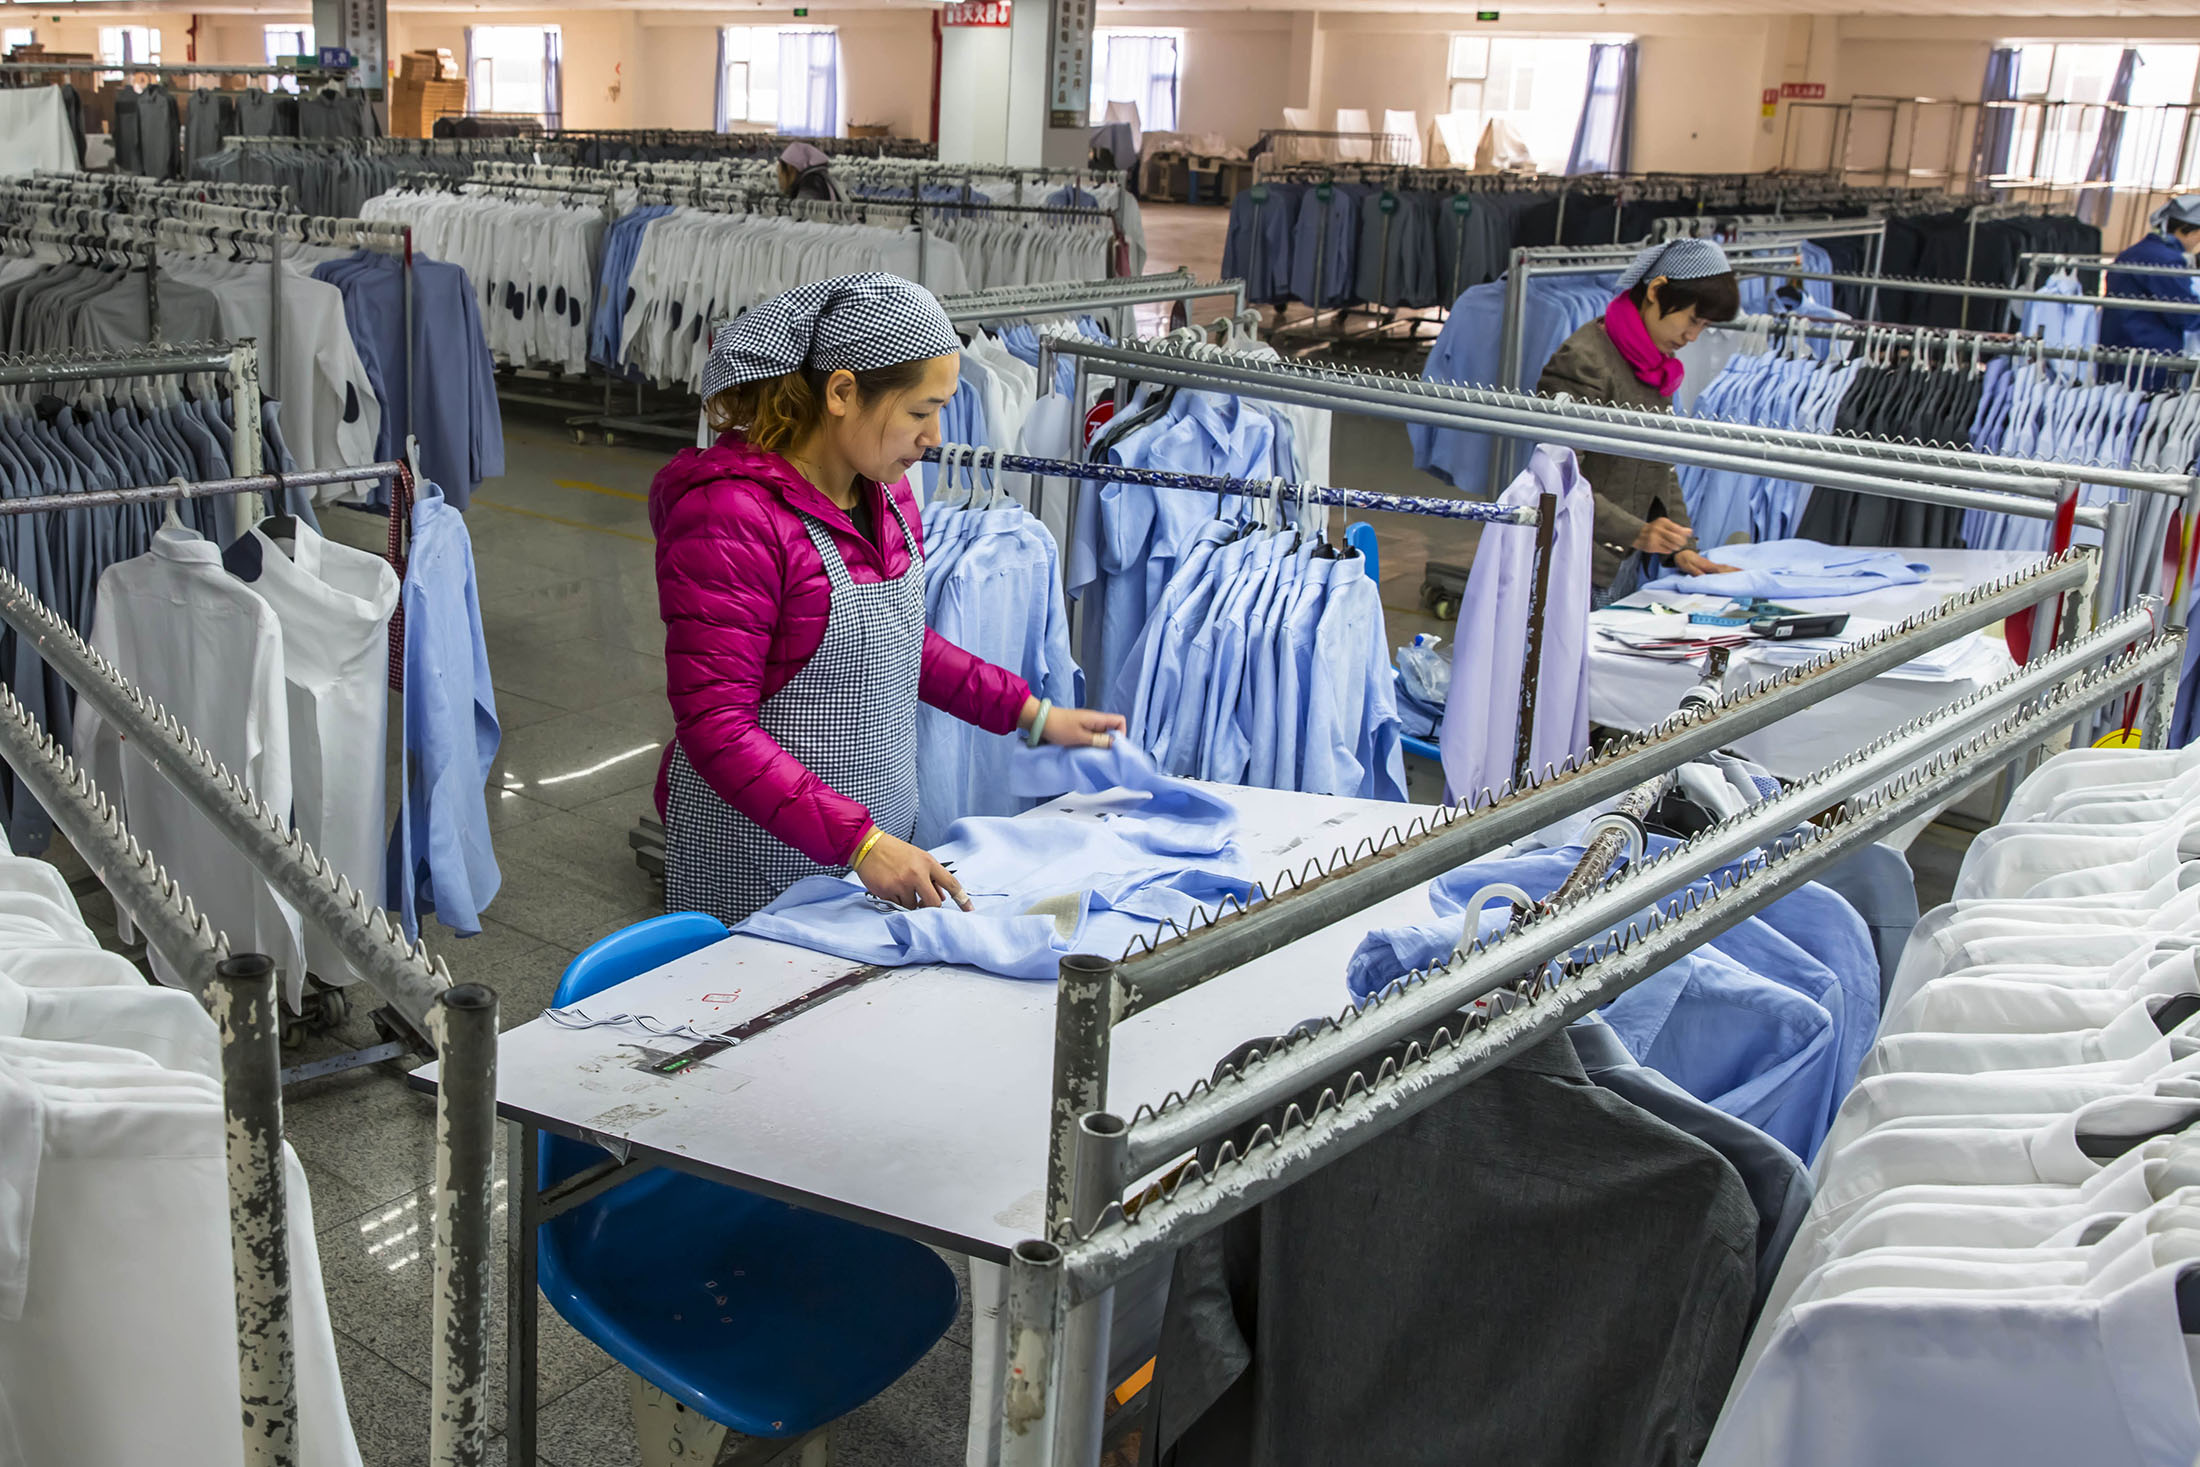 A woman works in a shirt factory in Nantong, in China's Jiangsu province on December 1, 2016. China's manufacturing activity growth accelerated in November, official data showed, reaching its fastest pace in more than two years as cheap credit and improving demand helped revive industry in the world's second-largest economy. / AFP / STR / China OUT (Photo credit should read STR/AFP/Getty Images)
